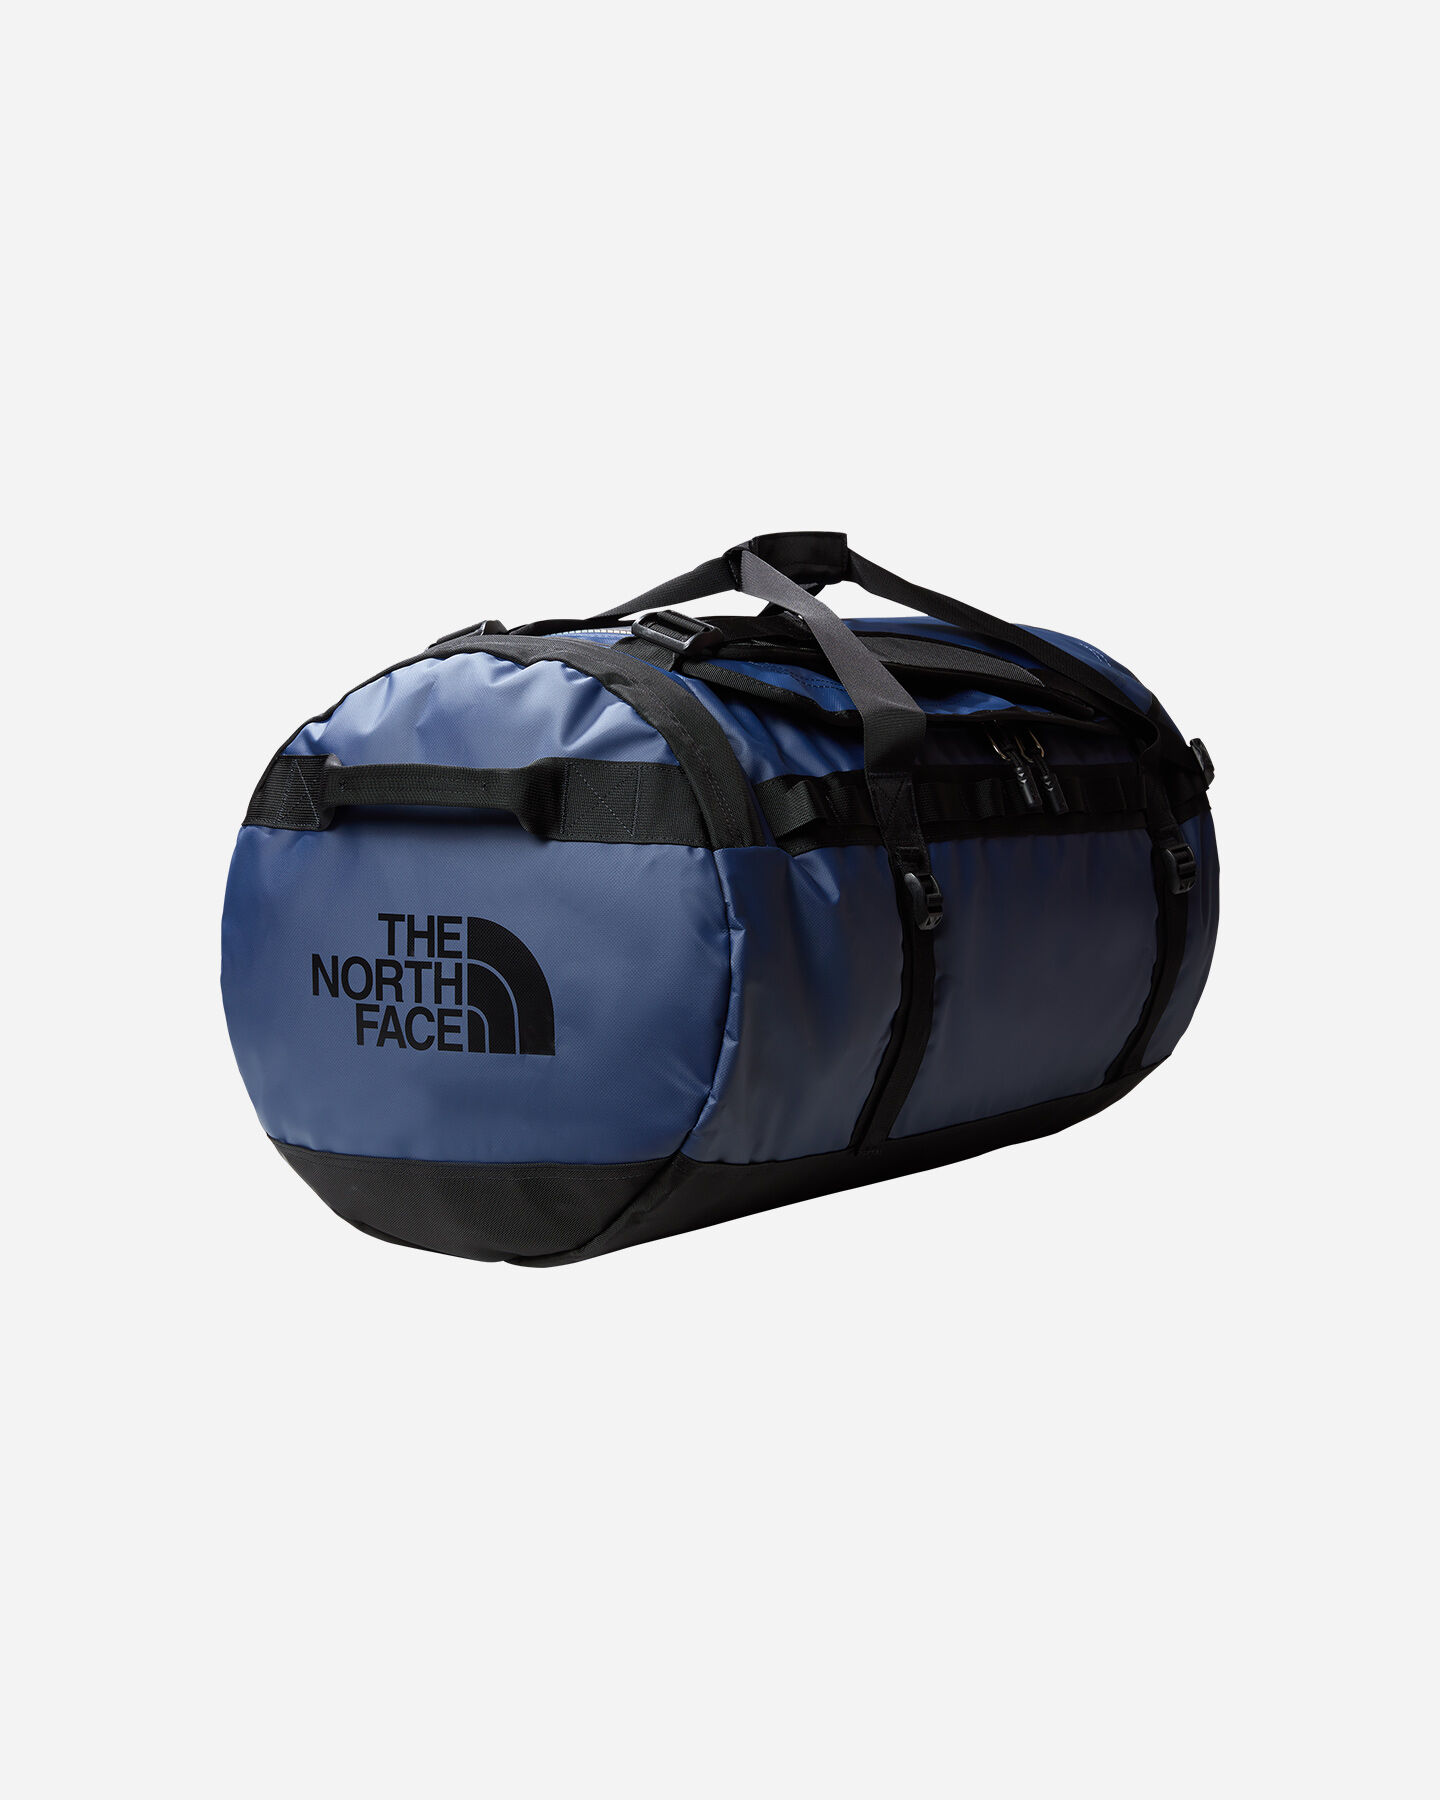  Borsa THE NORTH FACE BASE CAMP DUFFEL SUMMIT L S5535896|92A|OS scatto 0